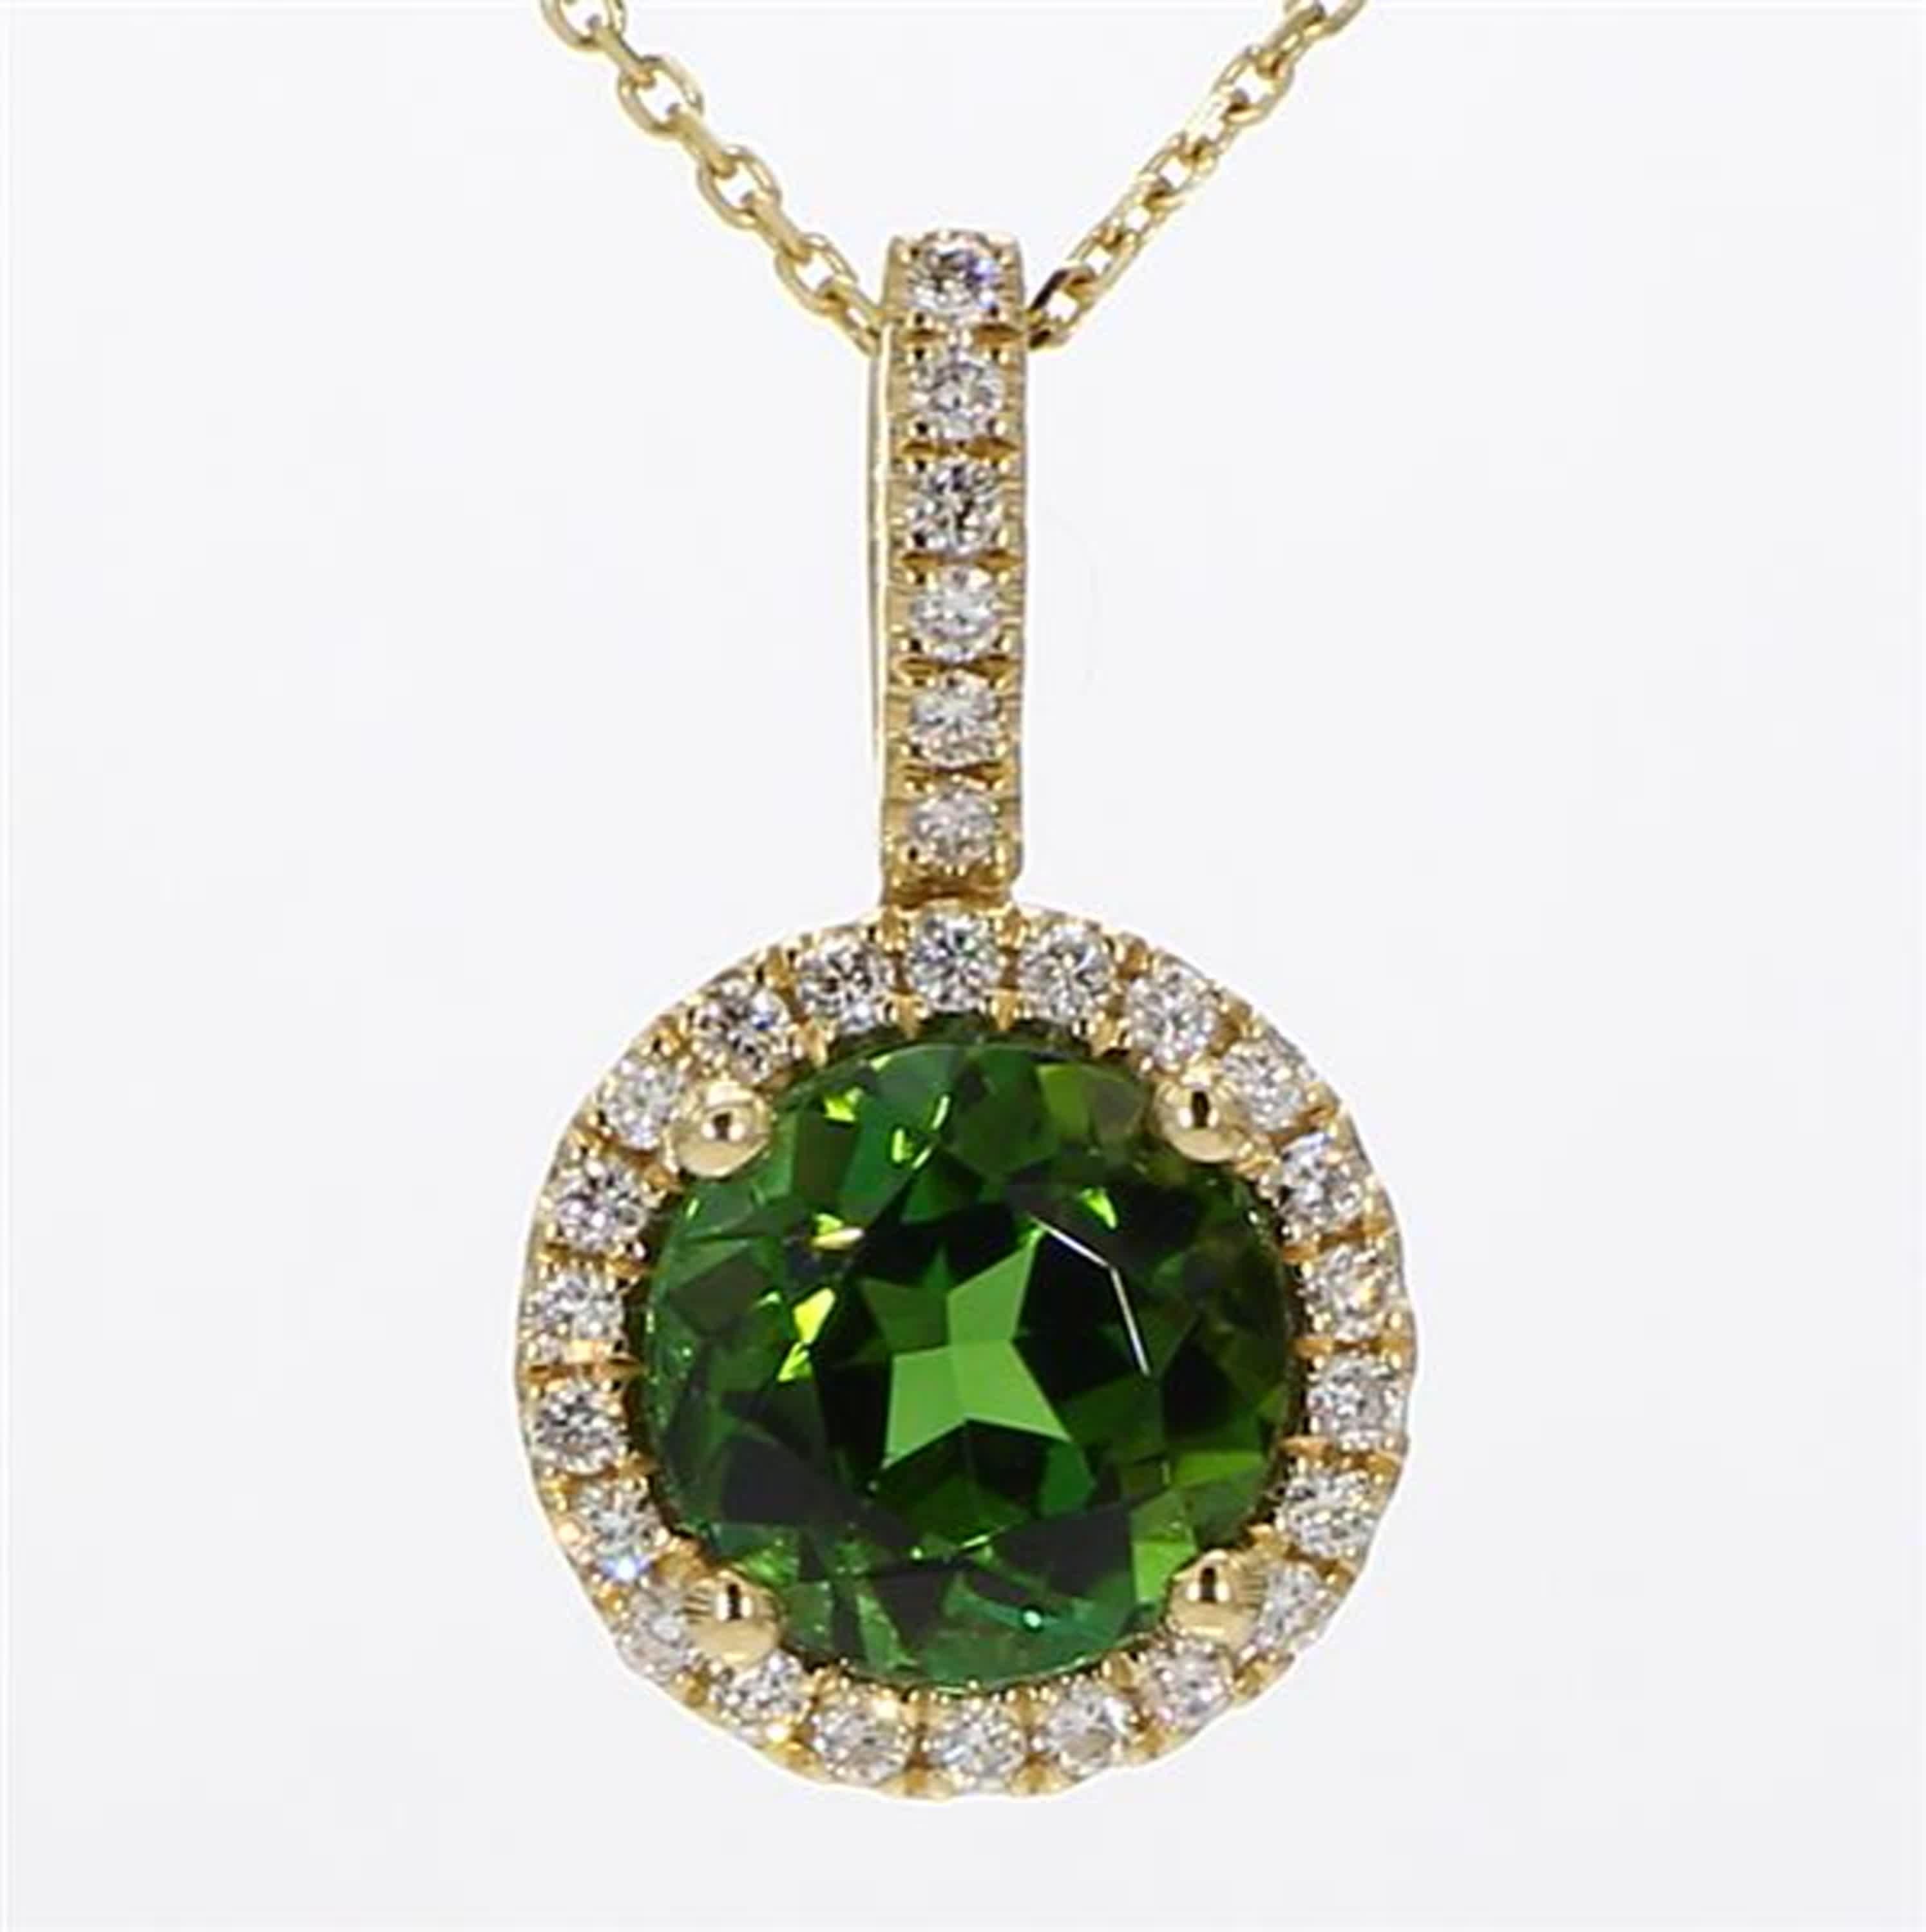 RareGemWorld's intriguing tourmaline pendant. Mounted in a beautiful 14K Yellow Gold setting with natural round cut green tourmaline. The tourmaline is surrounded by natural round white diamond melee. This pendant is guaranteed to impress and